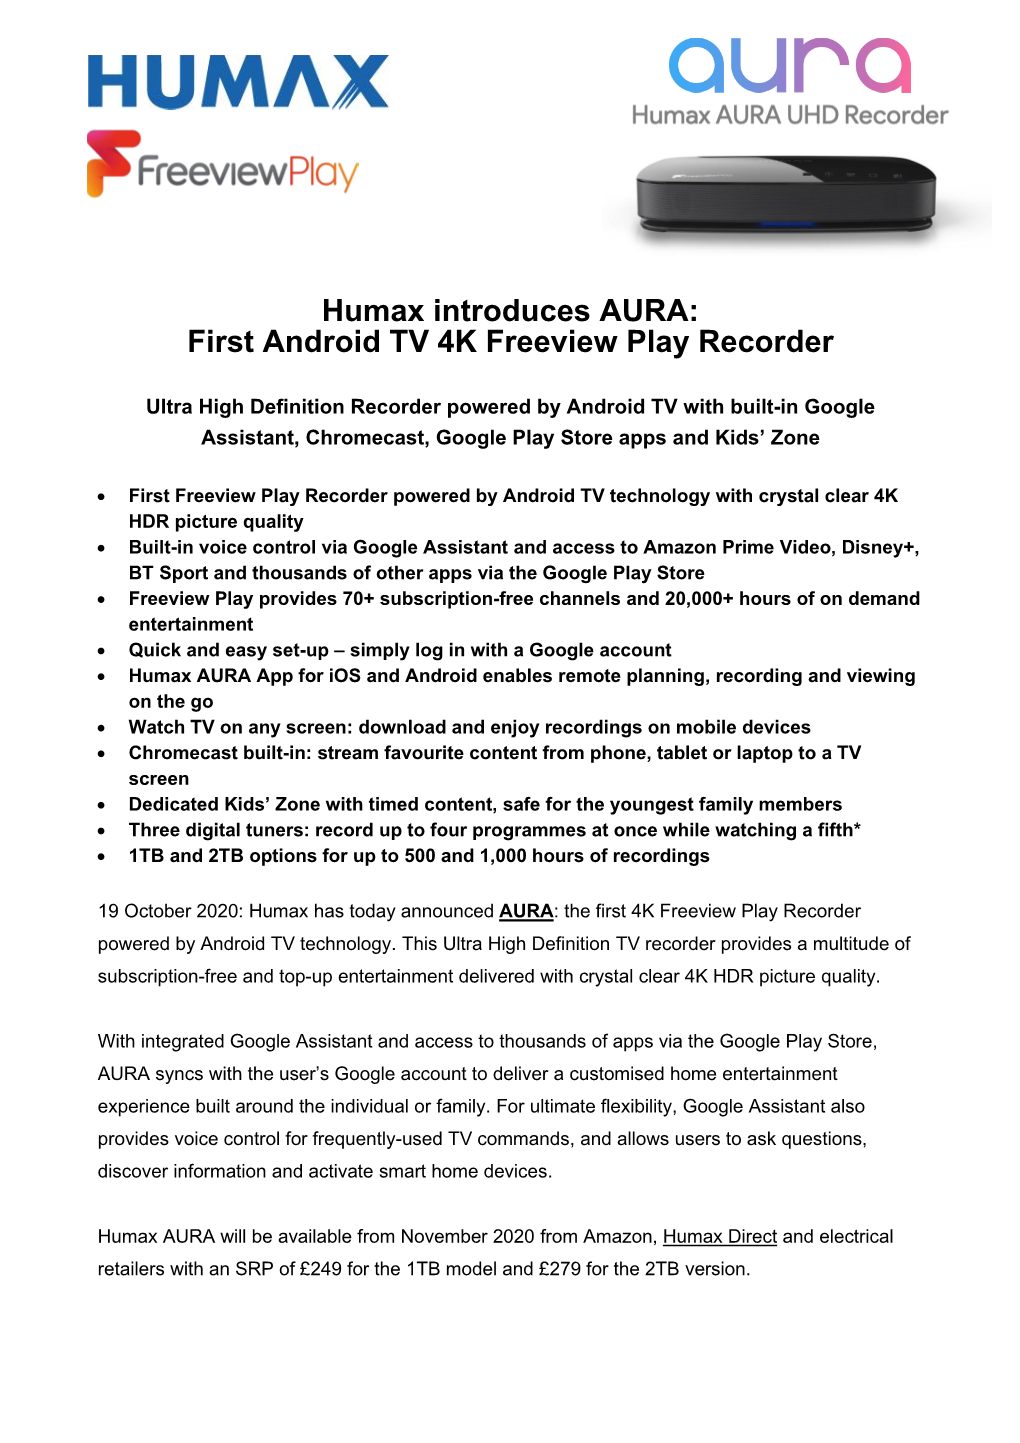 Humax Introduces AURA: First Android TV 4K Freeview Play Recorder